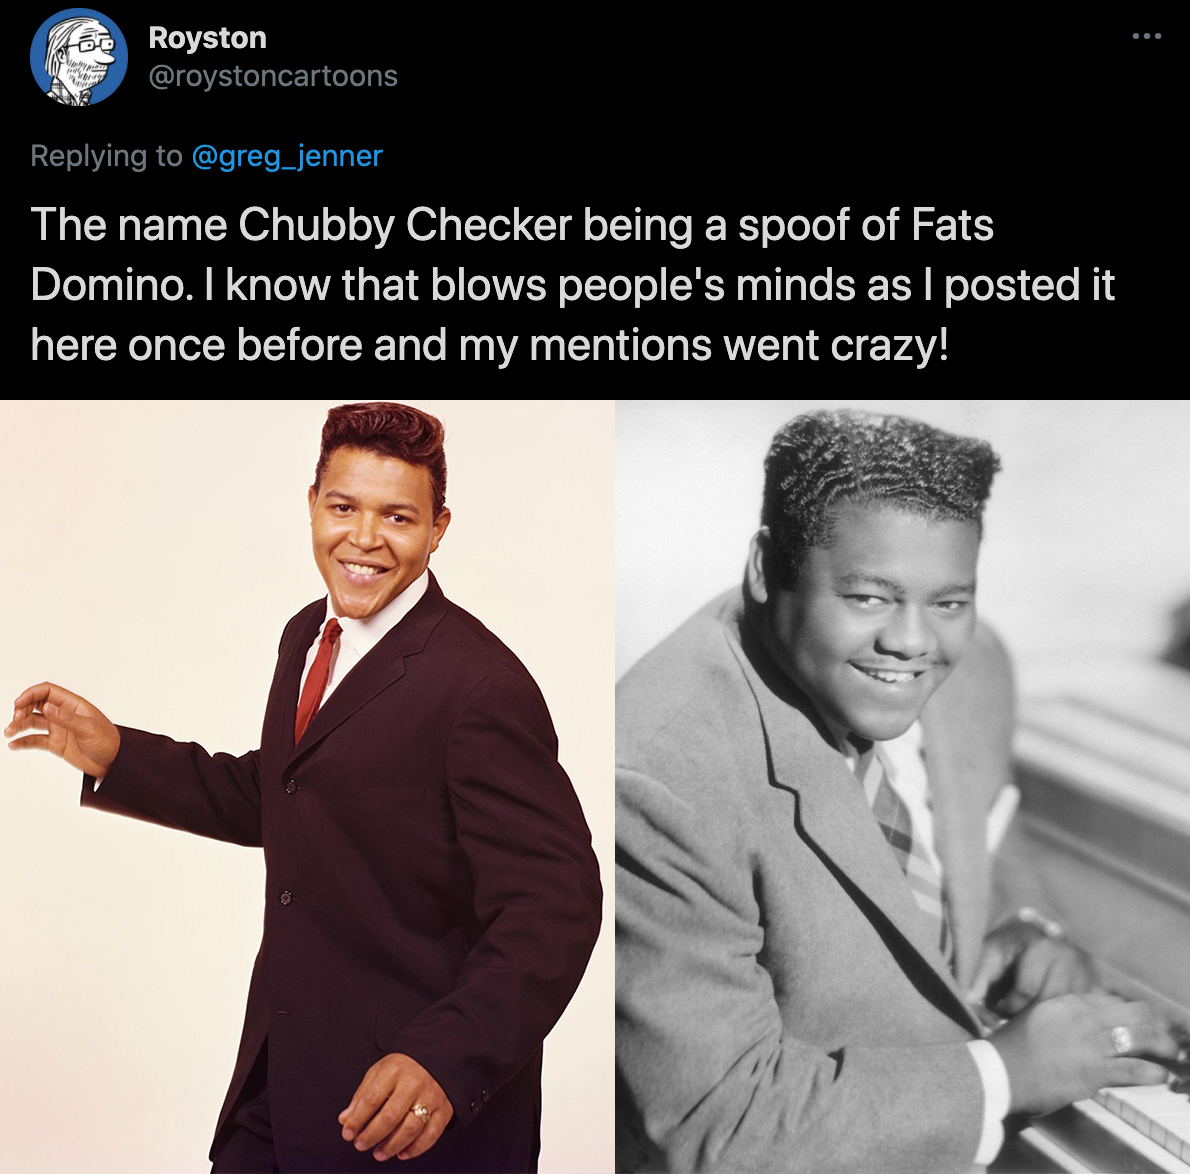 cool facts - The name Chubby Checker being a spoof of Fats Domino. I know that blows people's minds as I posted it here once before and my mentions went crazy!